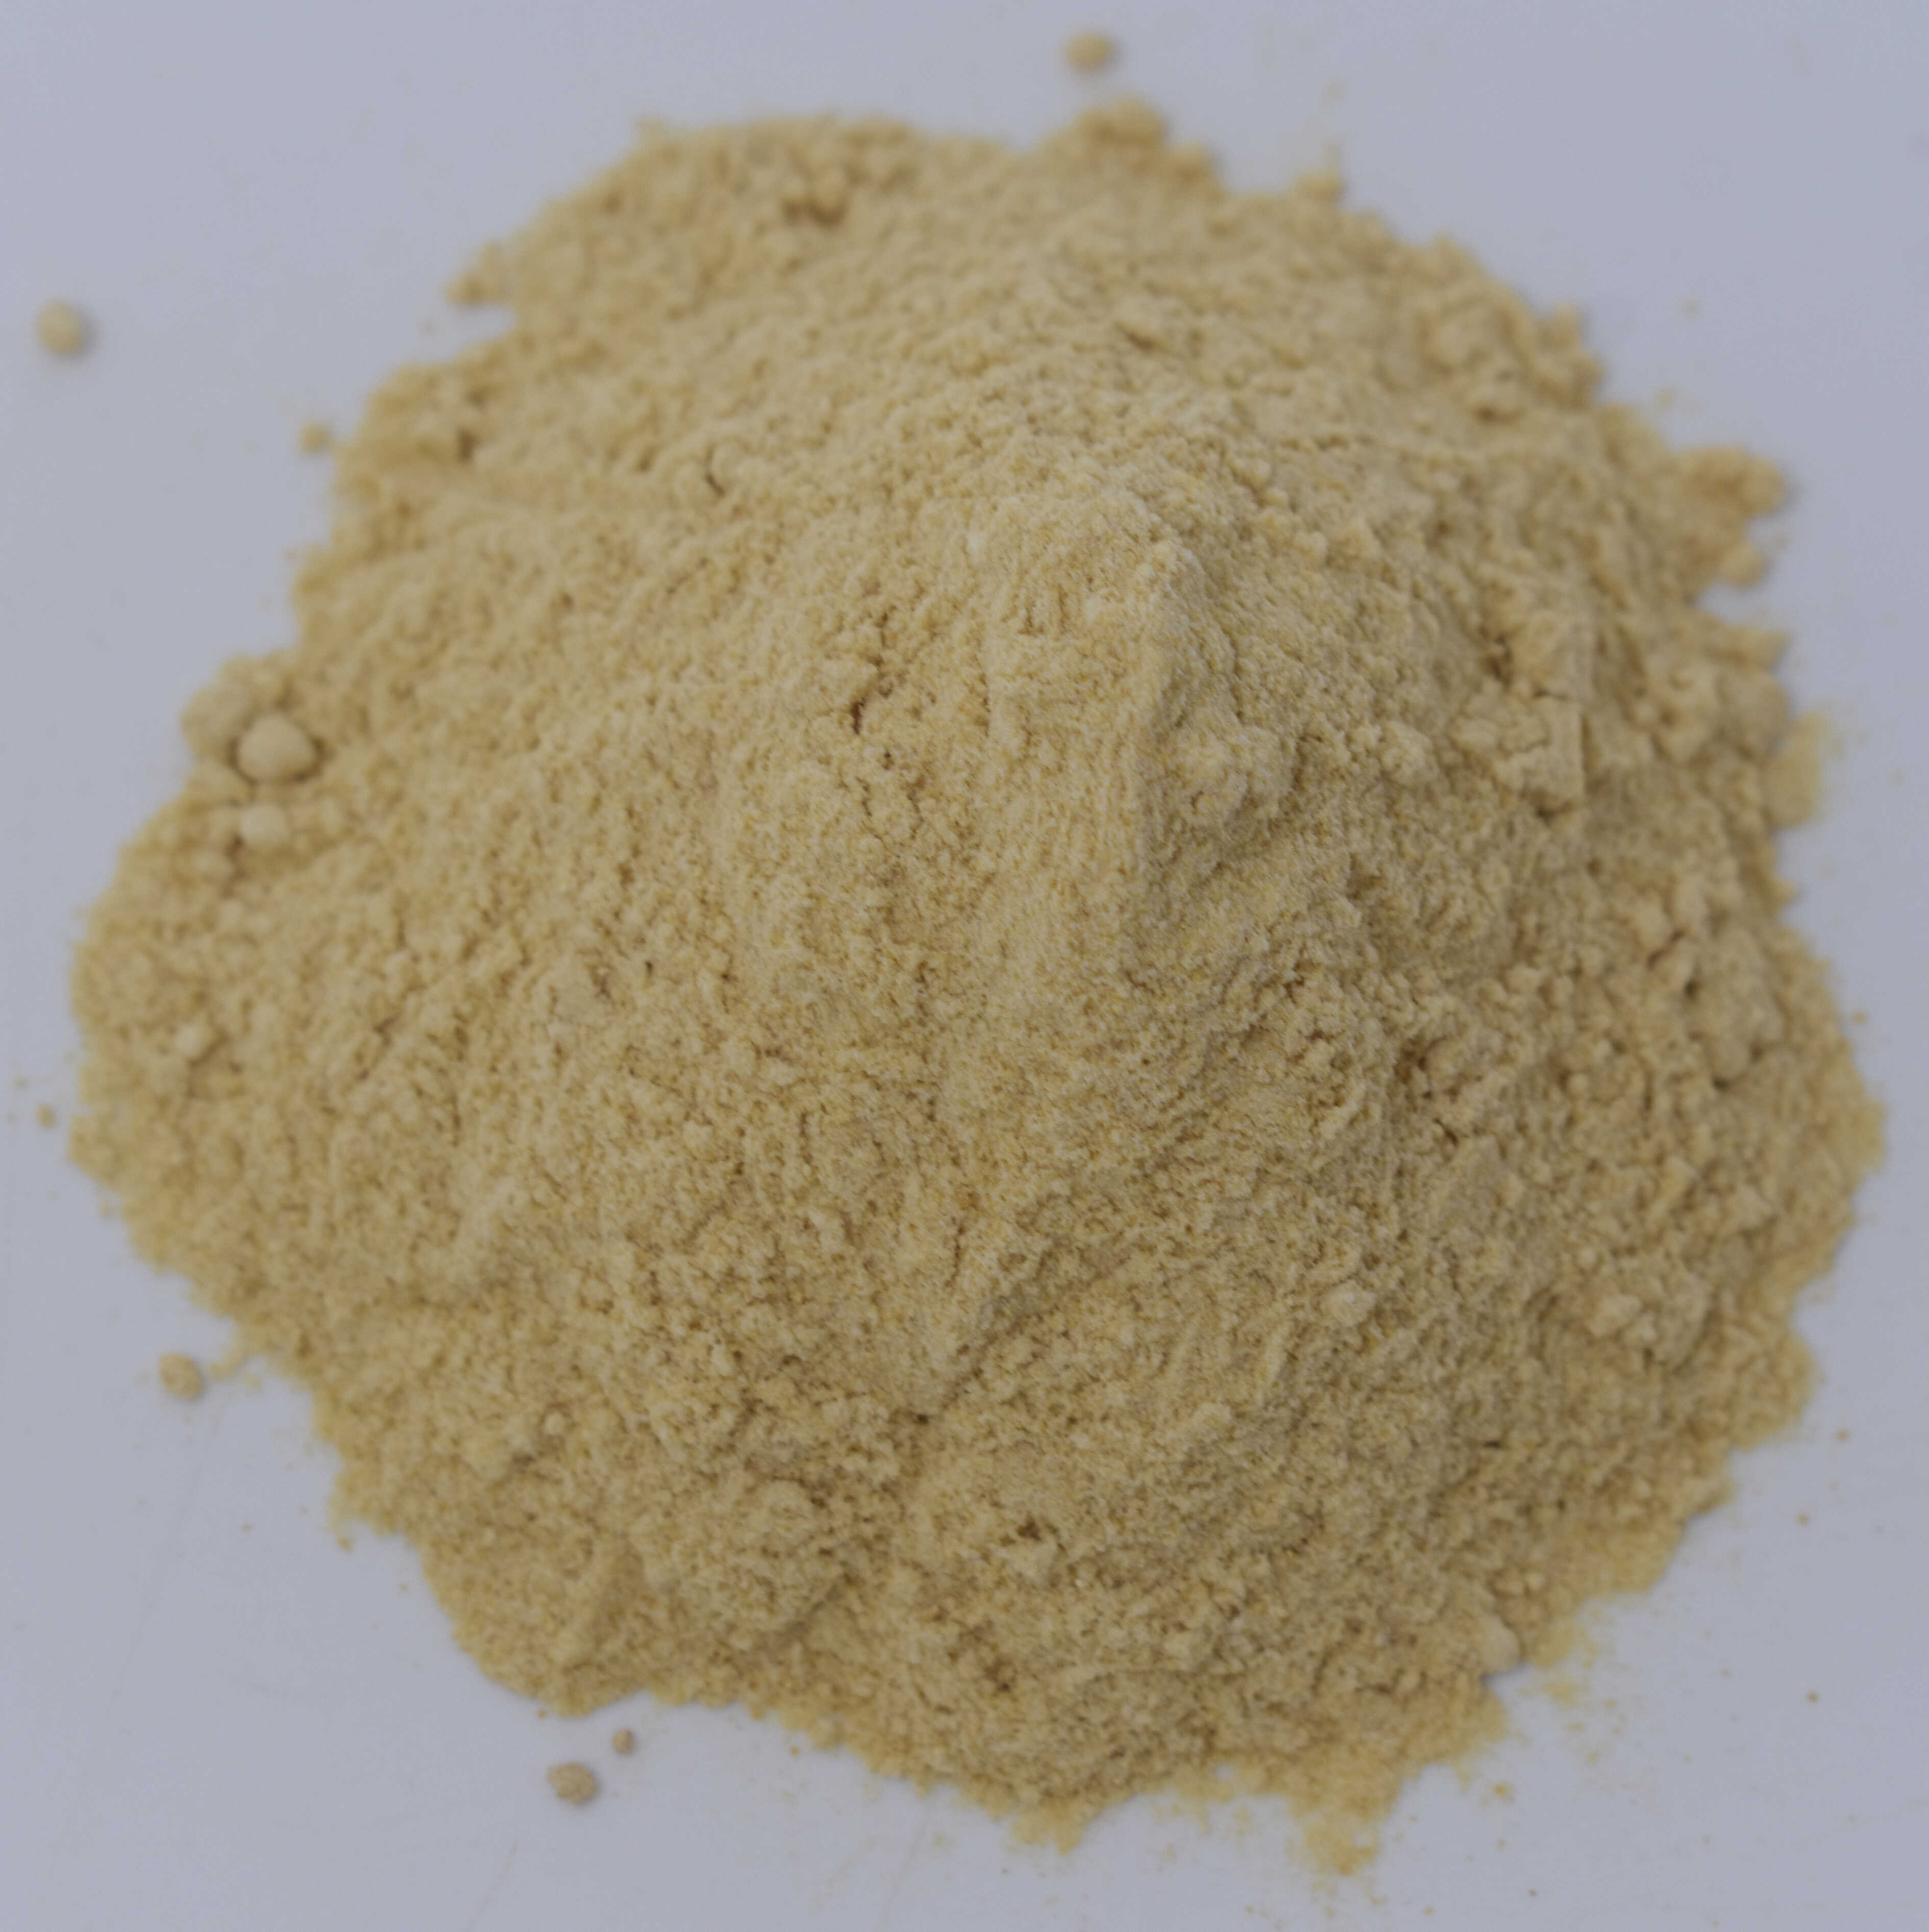 Ginger Root 5% Gingerol Extract - Top Photo